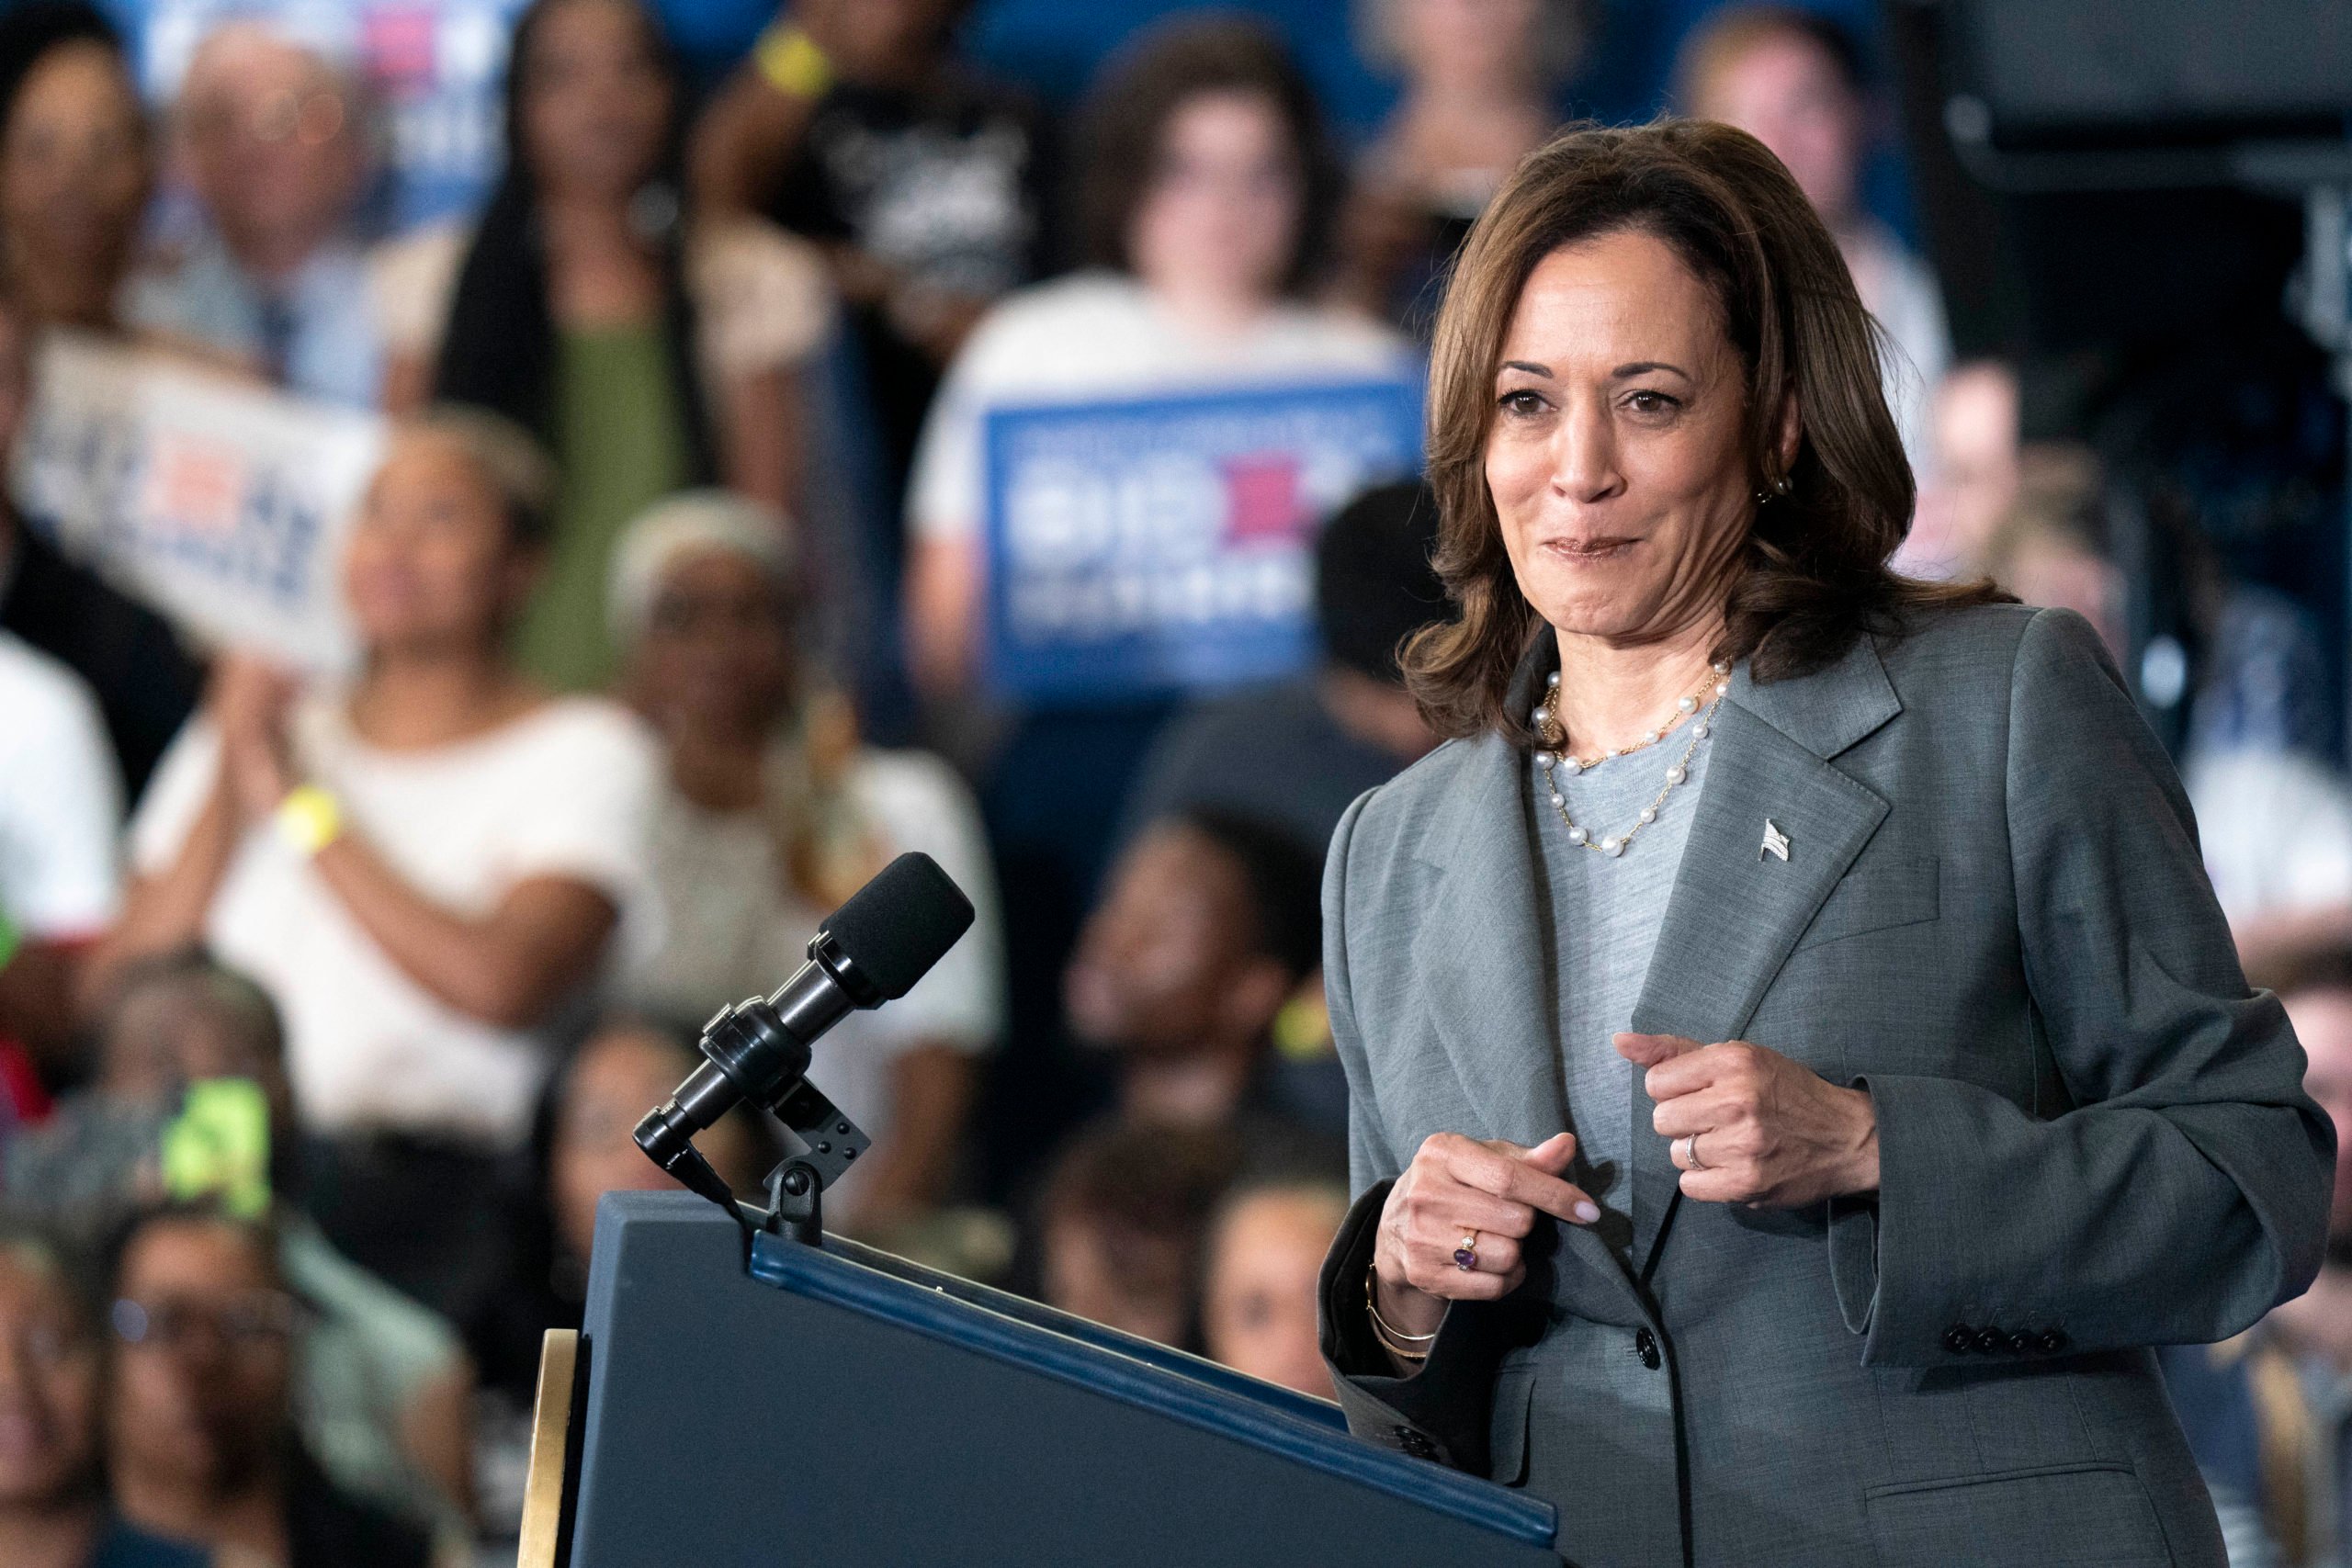 GREENSBORO, NORTH CAROLINA - JULY 11: U.S. Vice President Kamala Harris speaks to a crowd during a campaign event at James B. Dudley High School on July 11, 2024 in Greensboro, North Carolina. Harris continues campaigning ahead of the presidential election as Democrats face doubts about President Biden's fitness in his run for re-election against former President Donald Trump. (Photo by Sean Rayford/Getty Images)